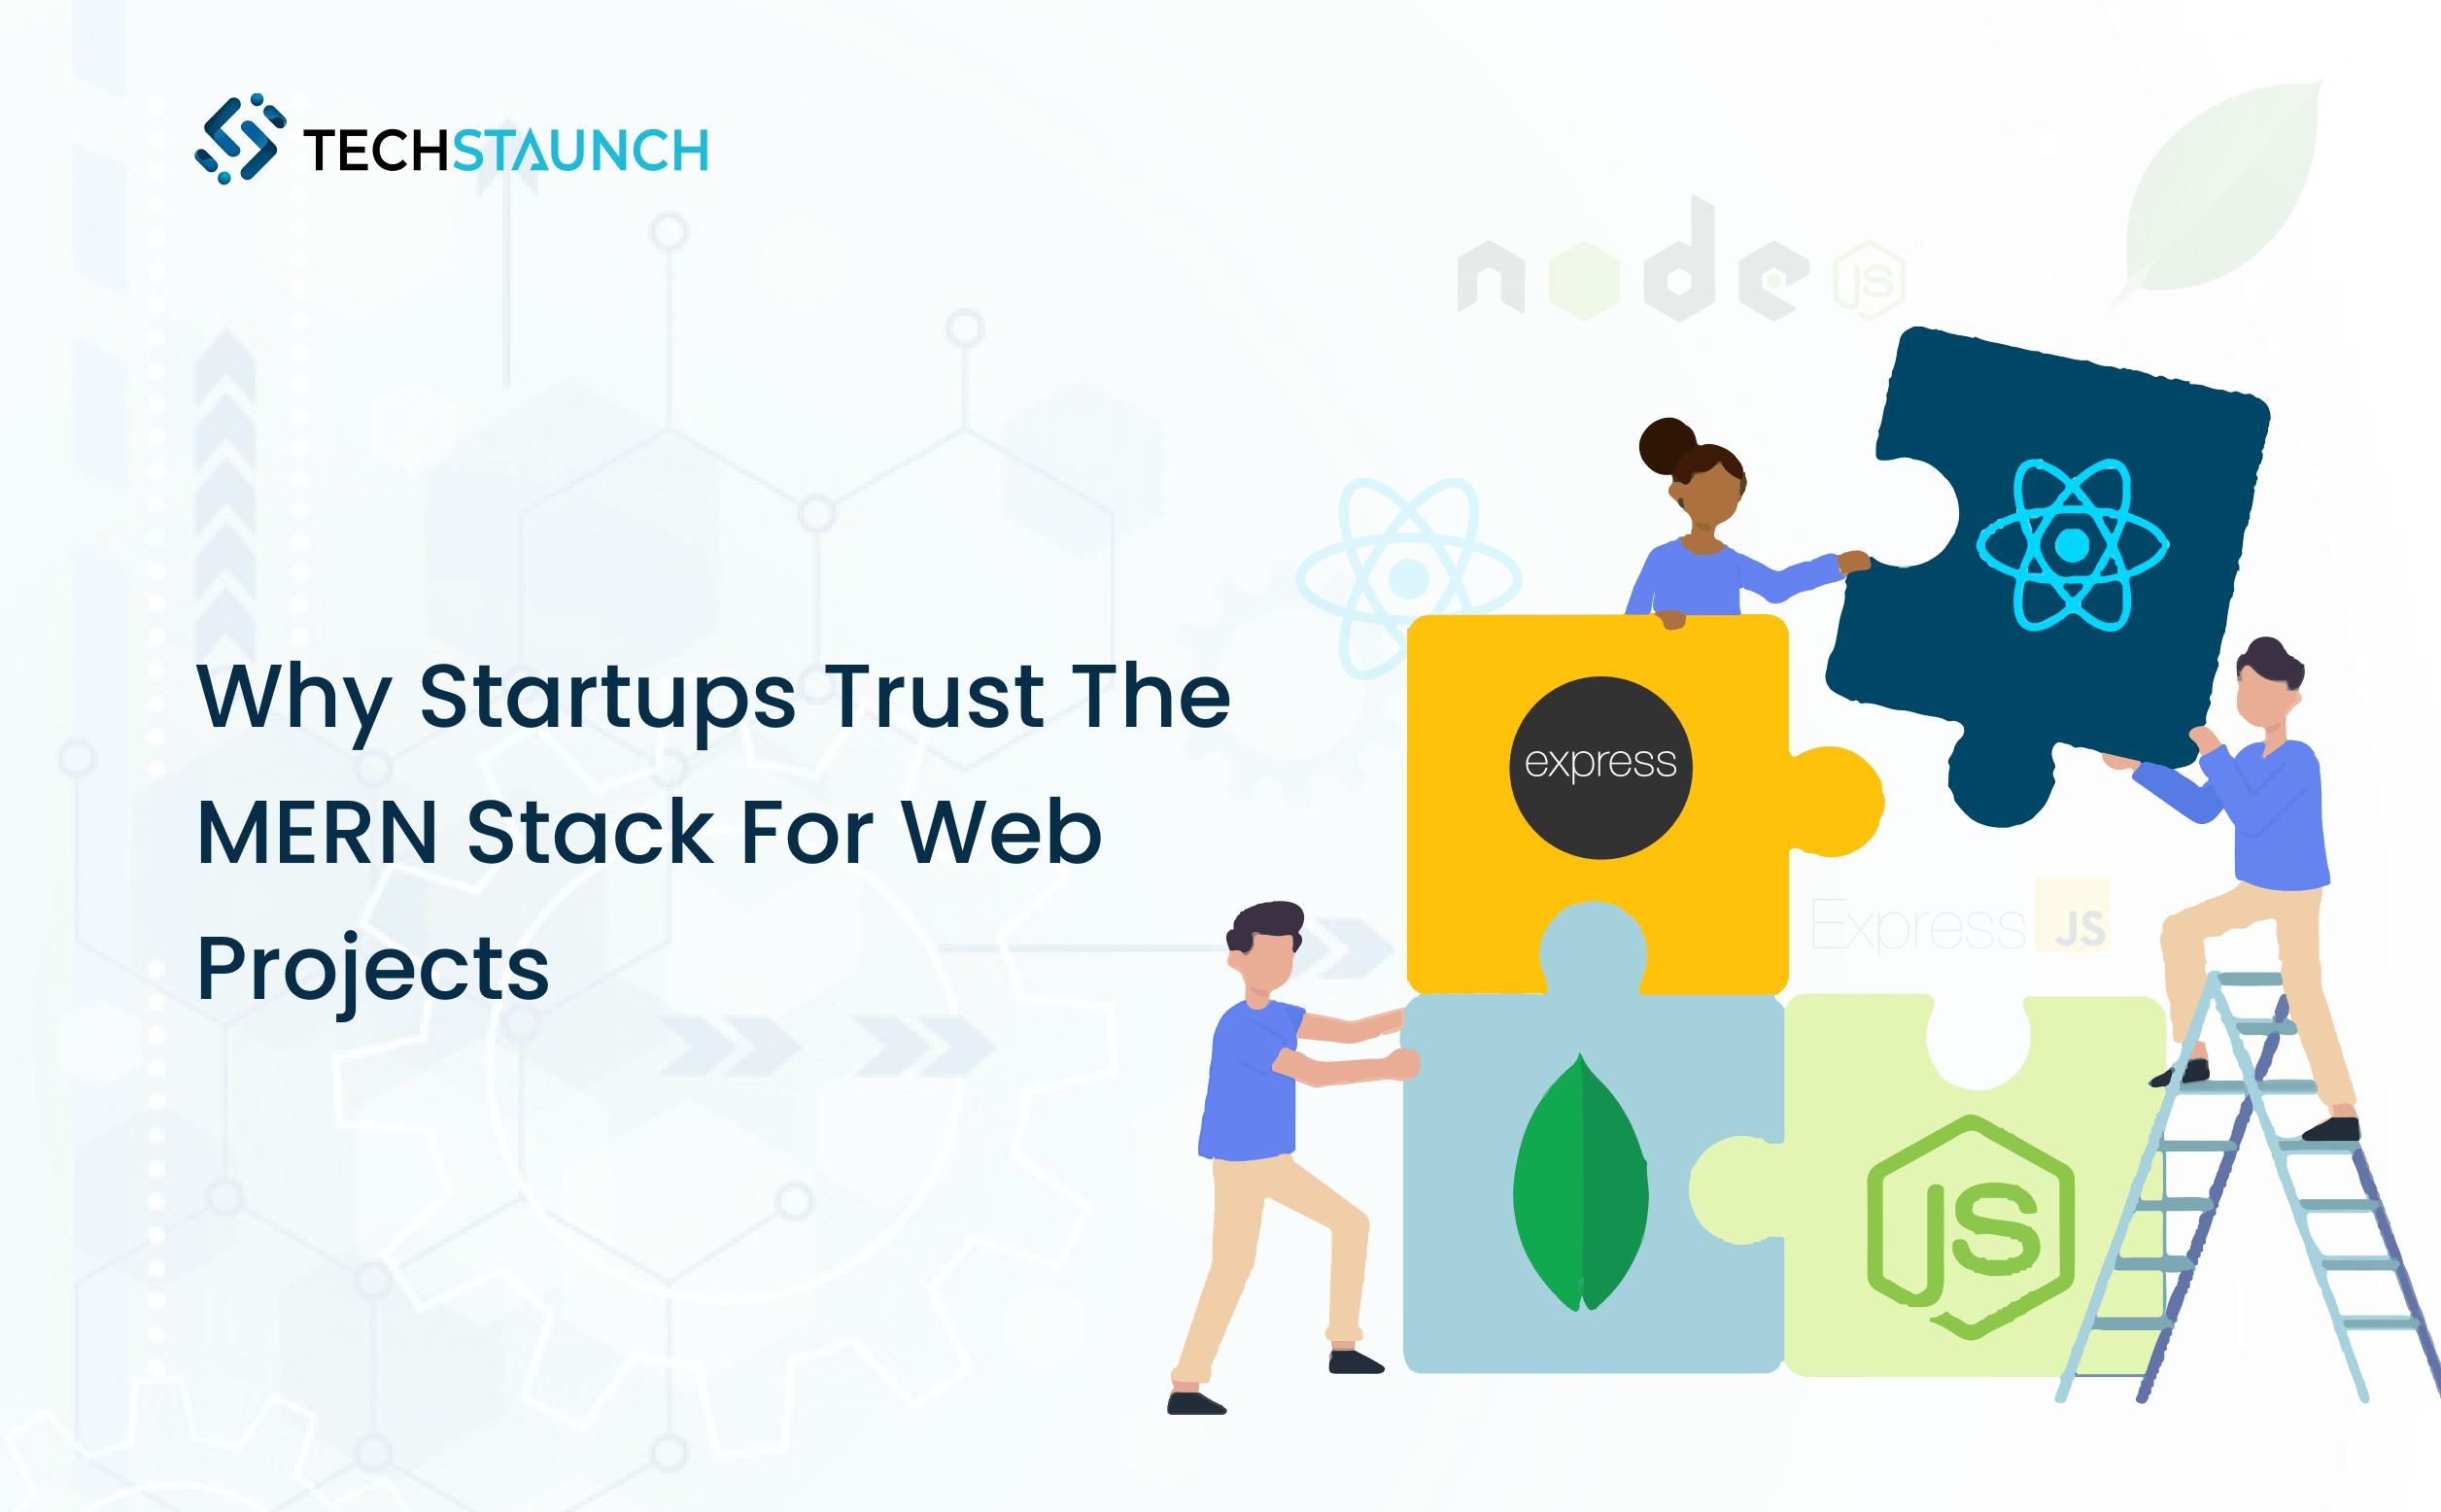 Why Startups and Enterprises Trust the MERN Stack for Web Projects